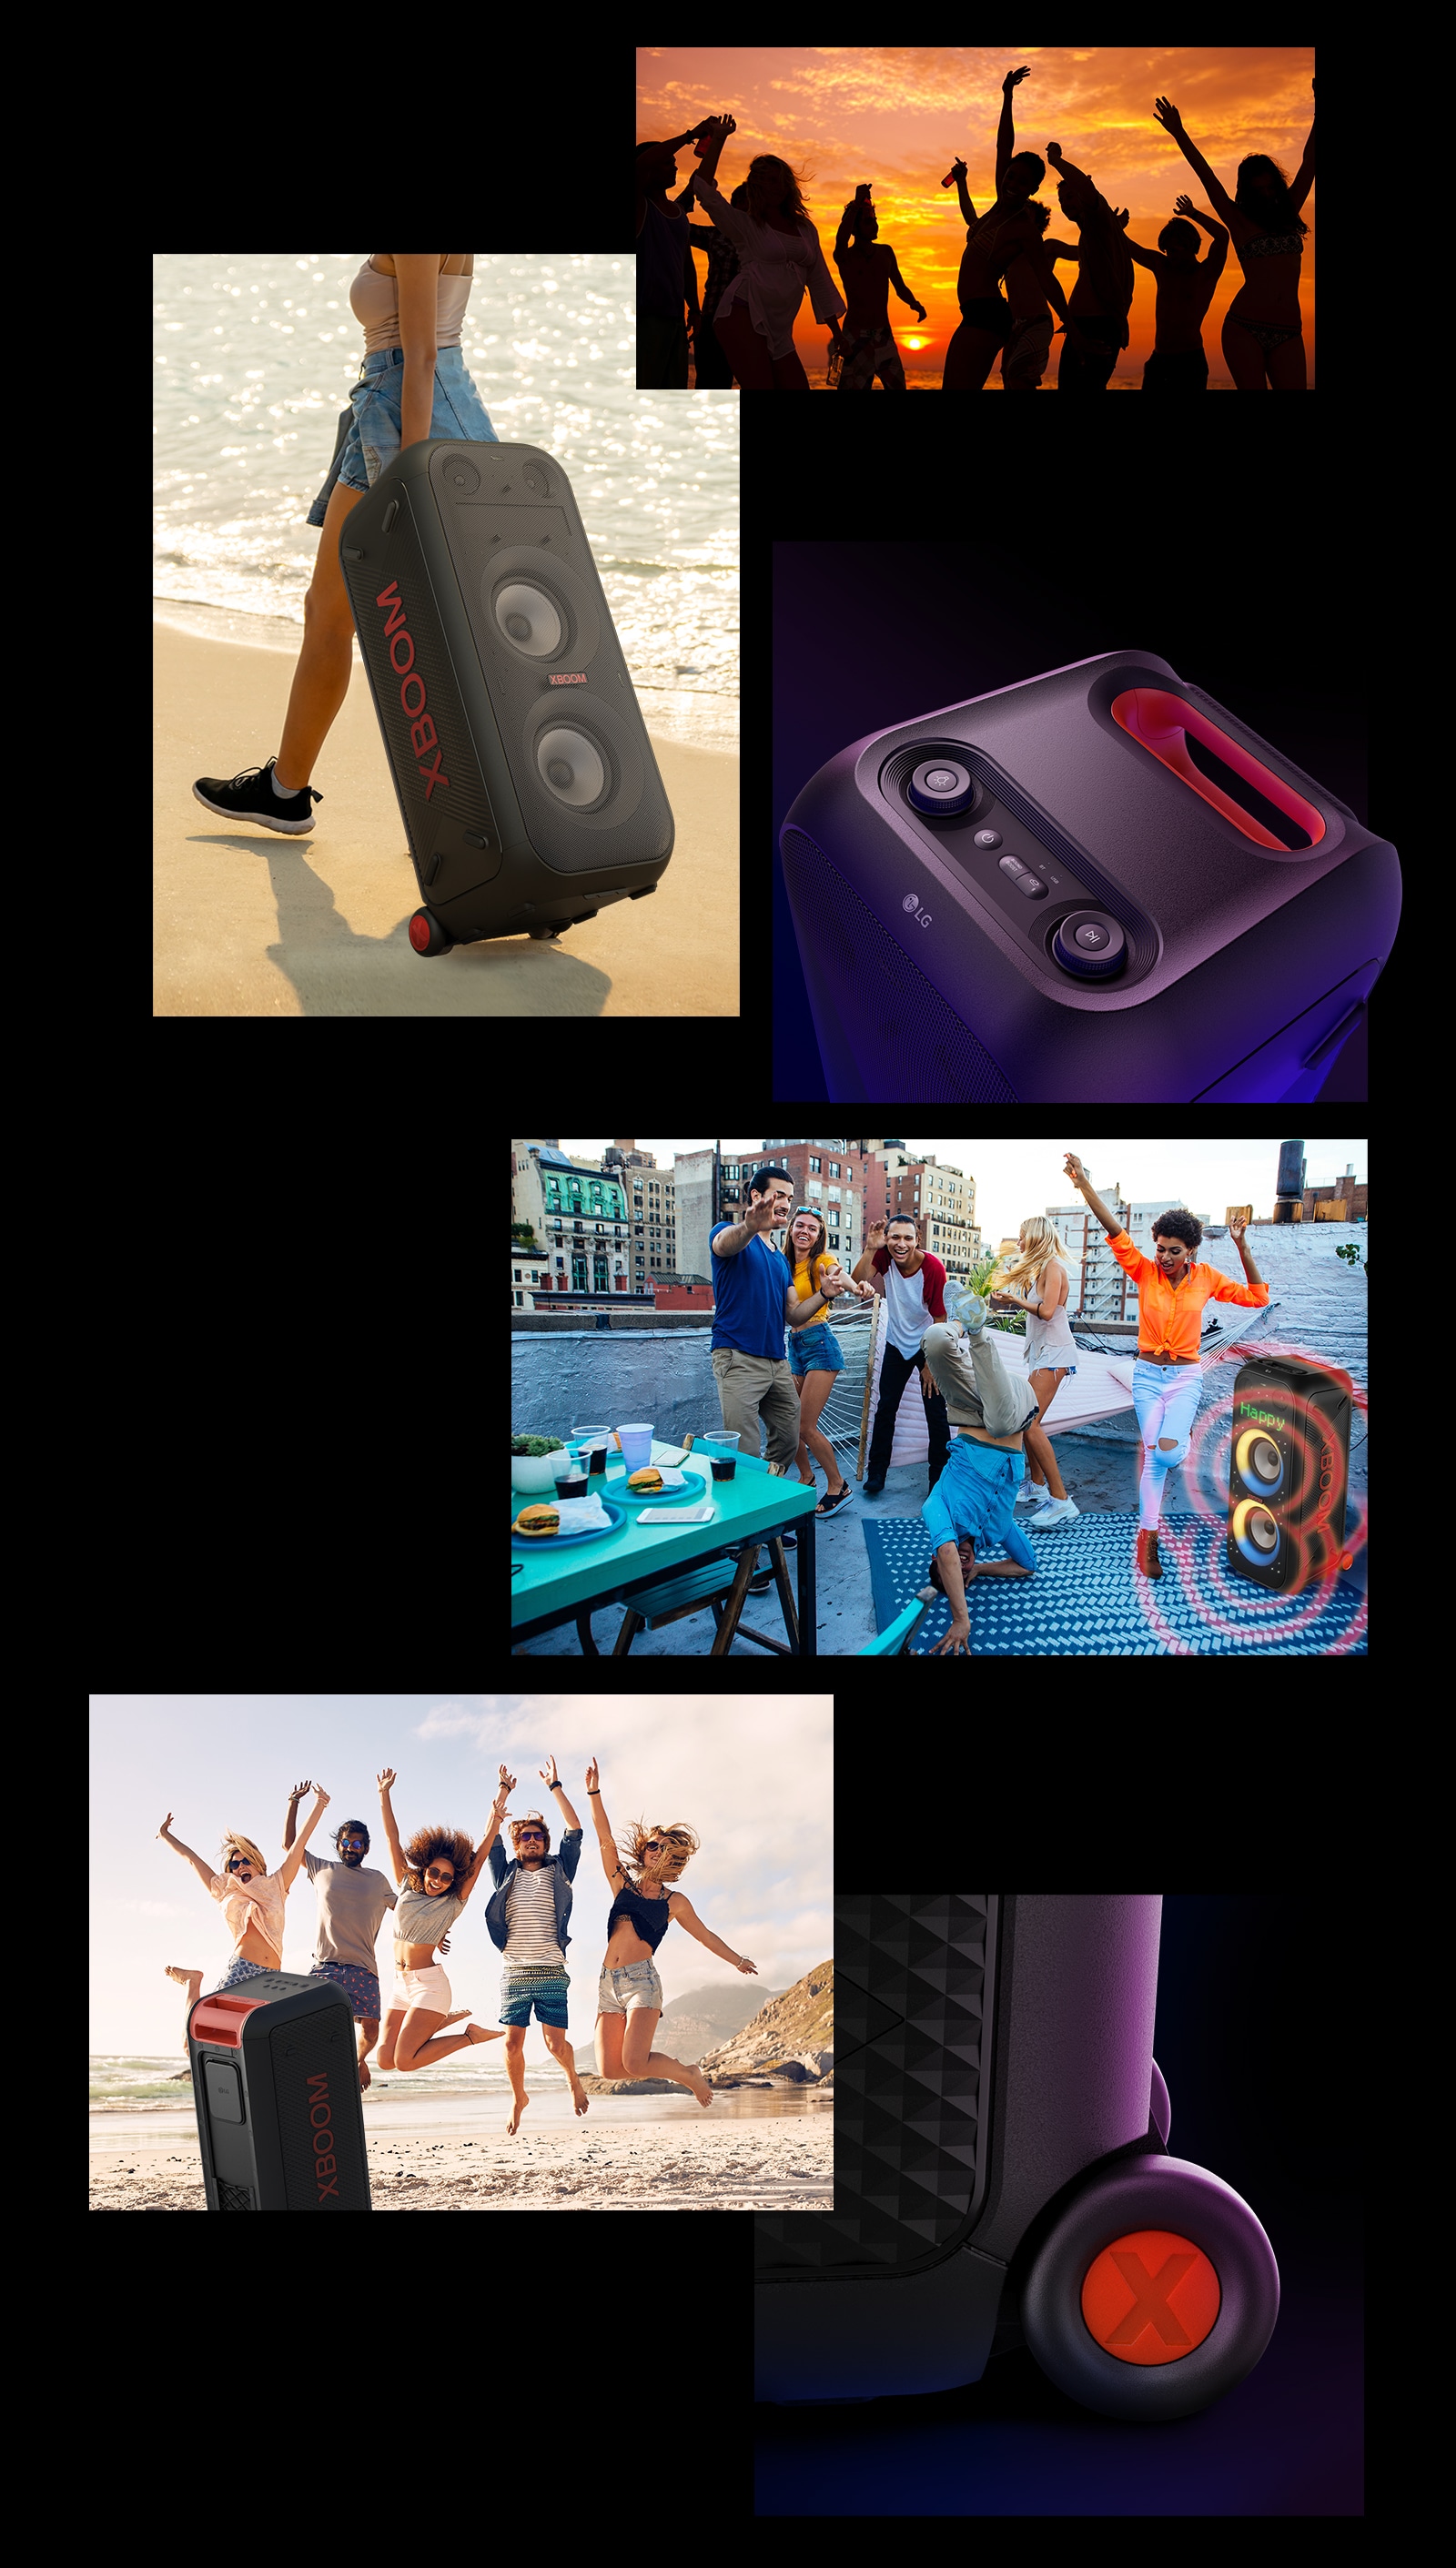 Illustrated images of LG XBOOM XL9T. From the top, shillouet of people, with the telescopic handle and wheels woman carrys the speaker easily. Top view of the speaker and telescopic handle. People are enjoying rooftop party, two LG XBOOM XL9T with sound graphics are placed behind. Back view of the speaker and people are juming on the beach, close-up of the wheel.